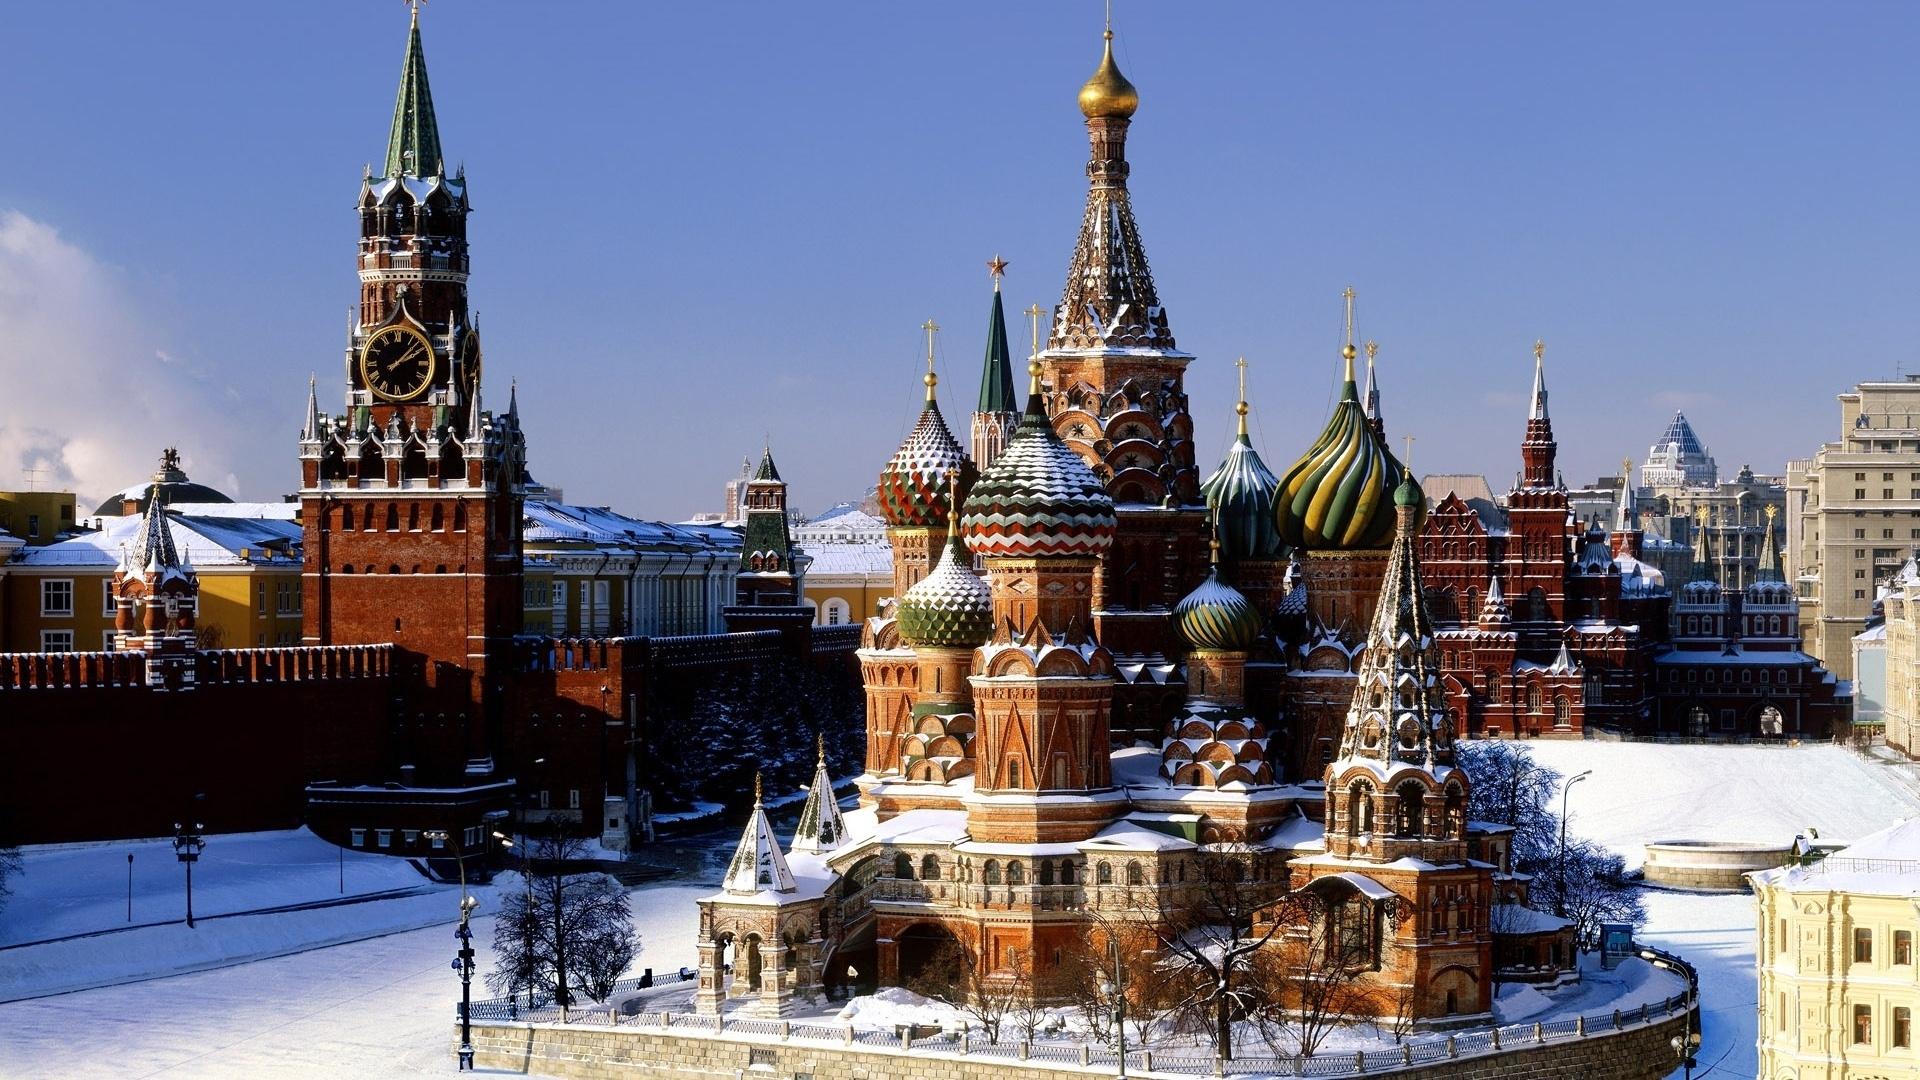 Download wallpaper 1920x1080 moscow, kremlin, red square, russia